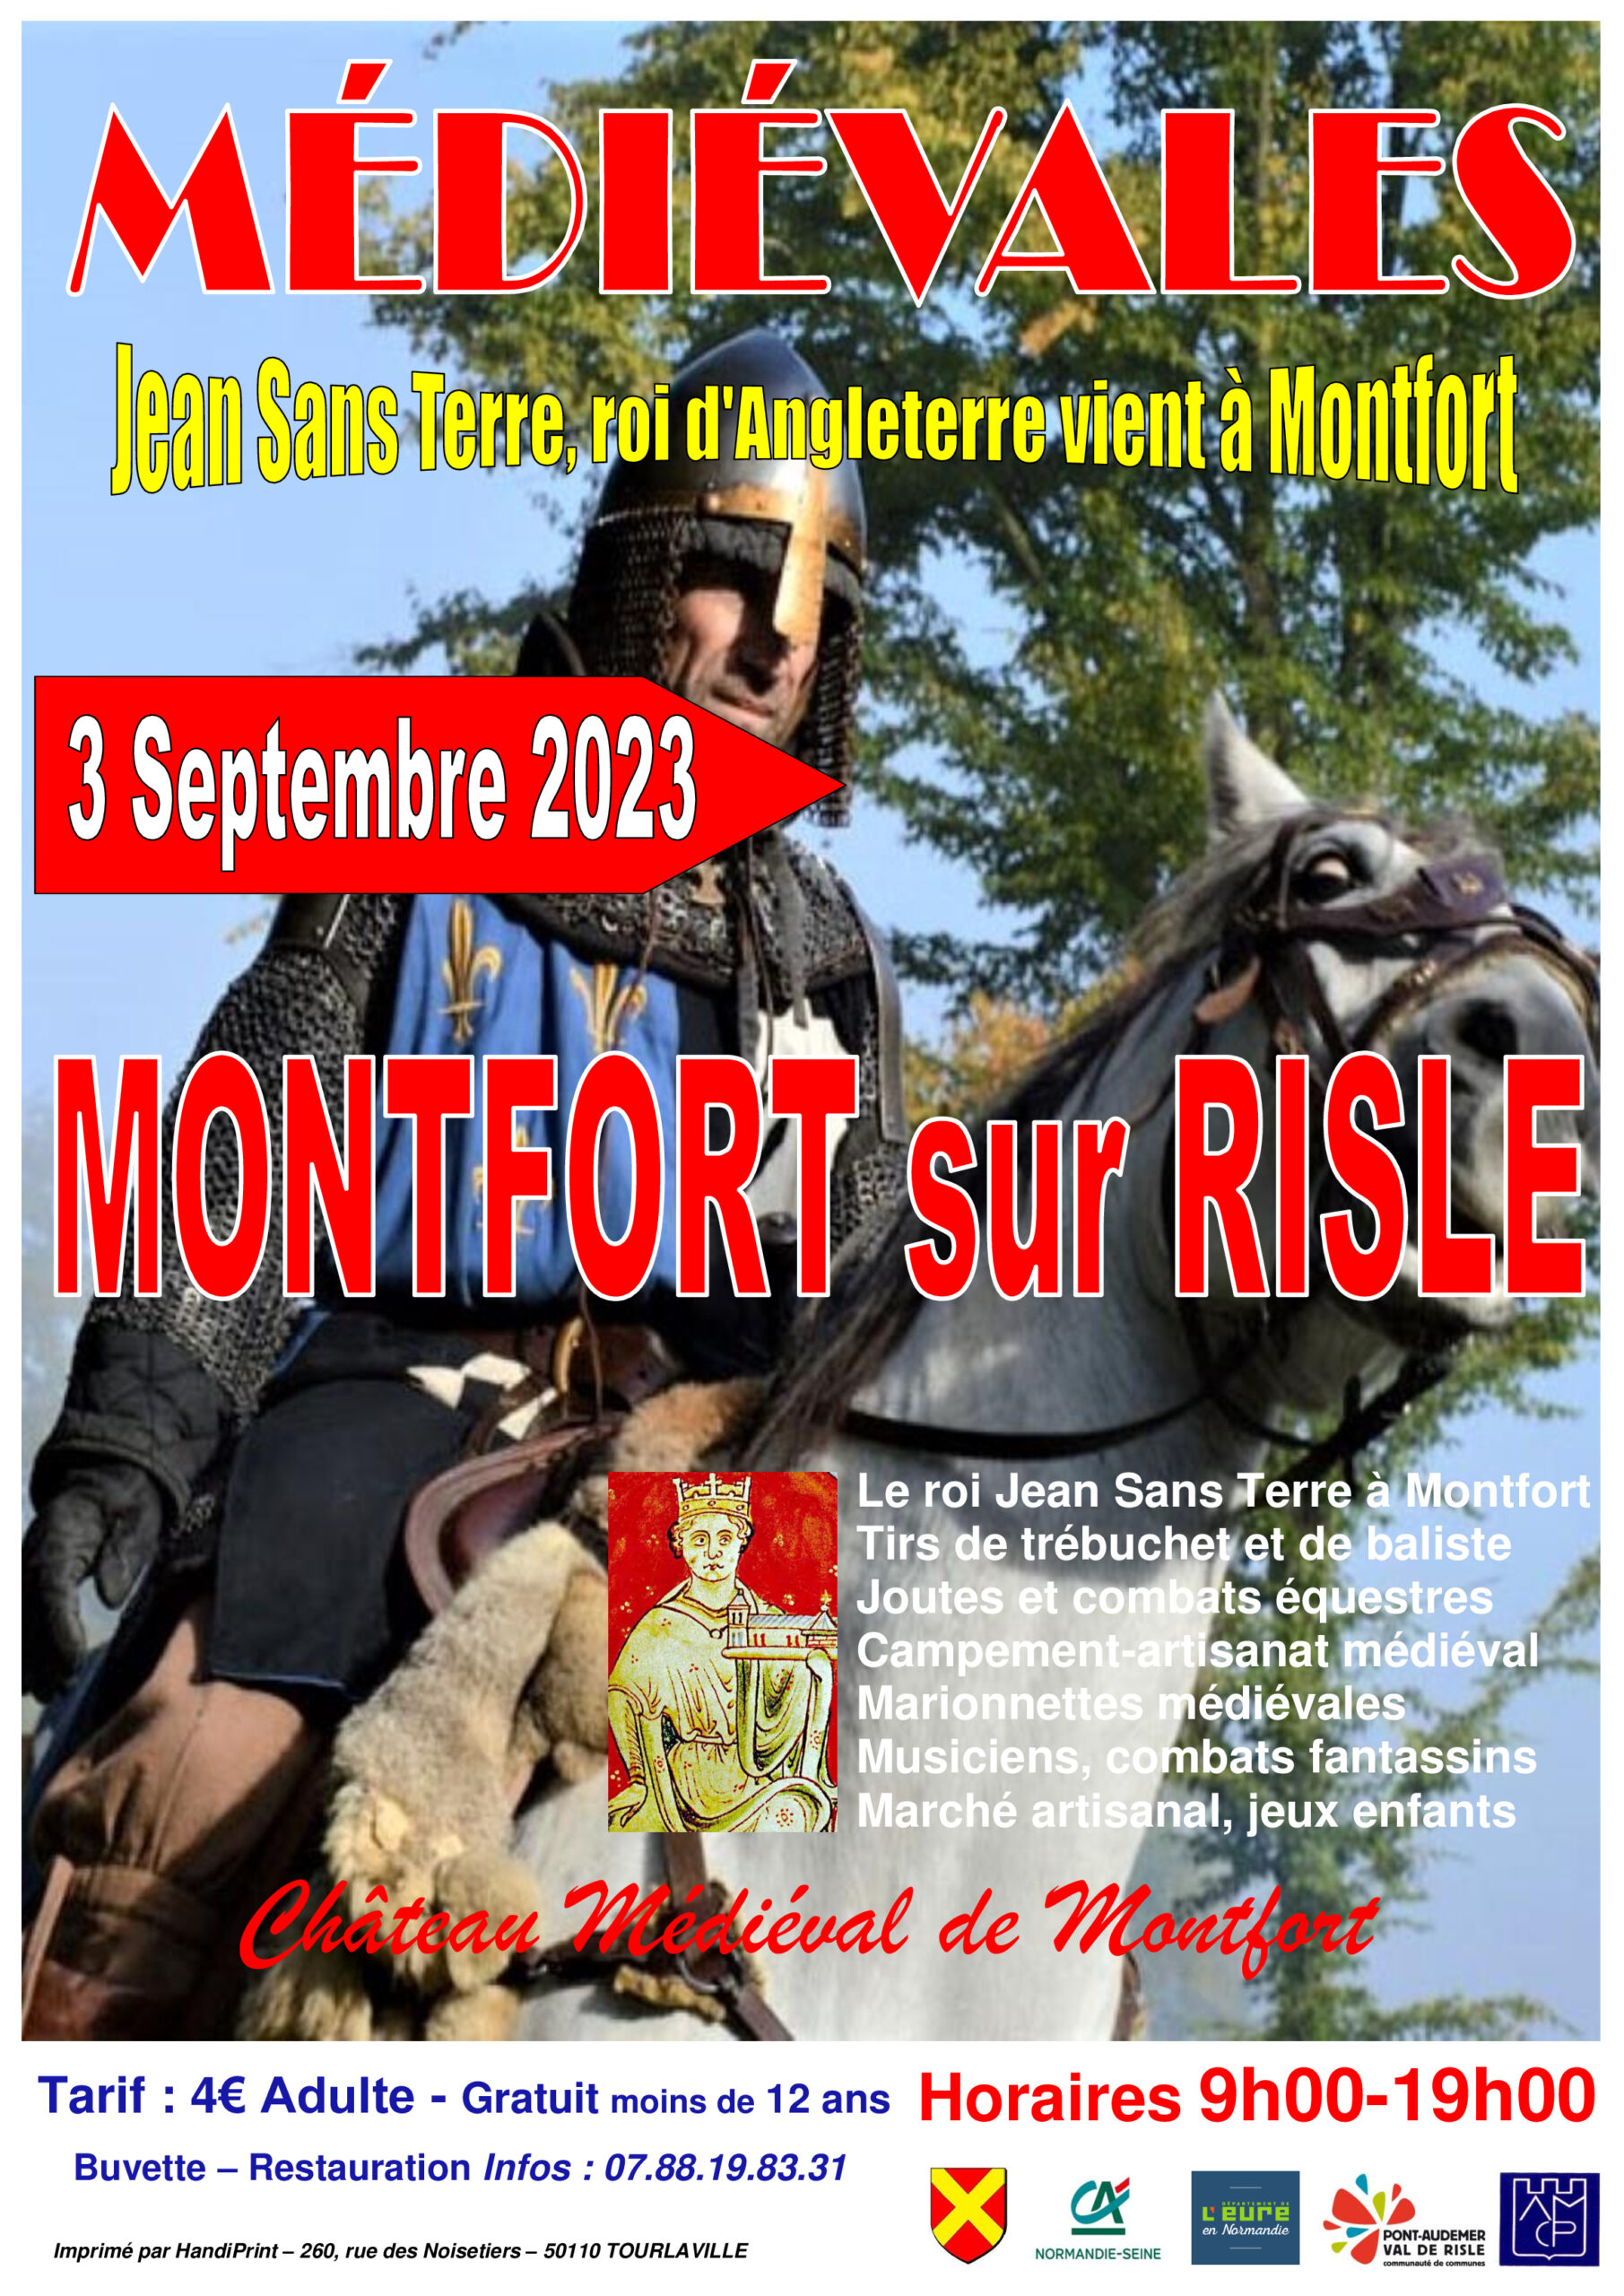 Affiche Medievales 2023 scaled